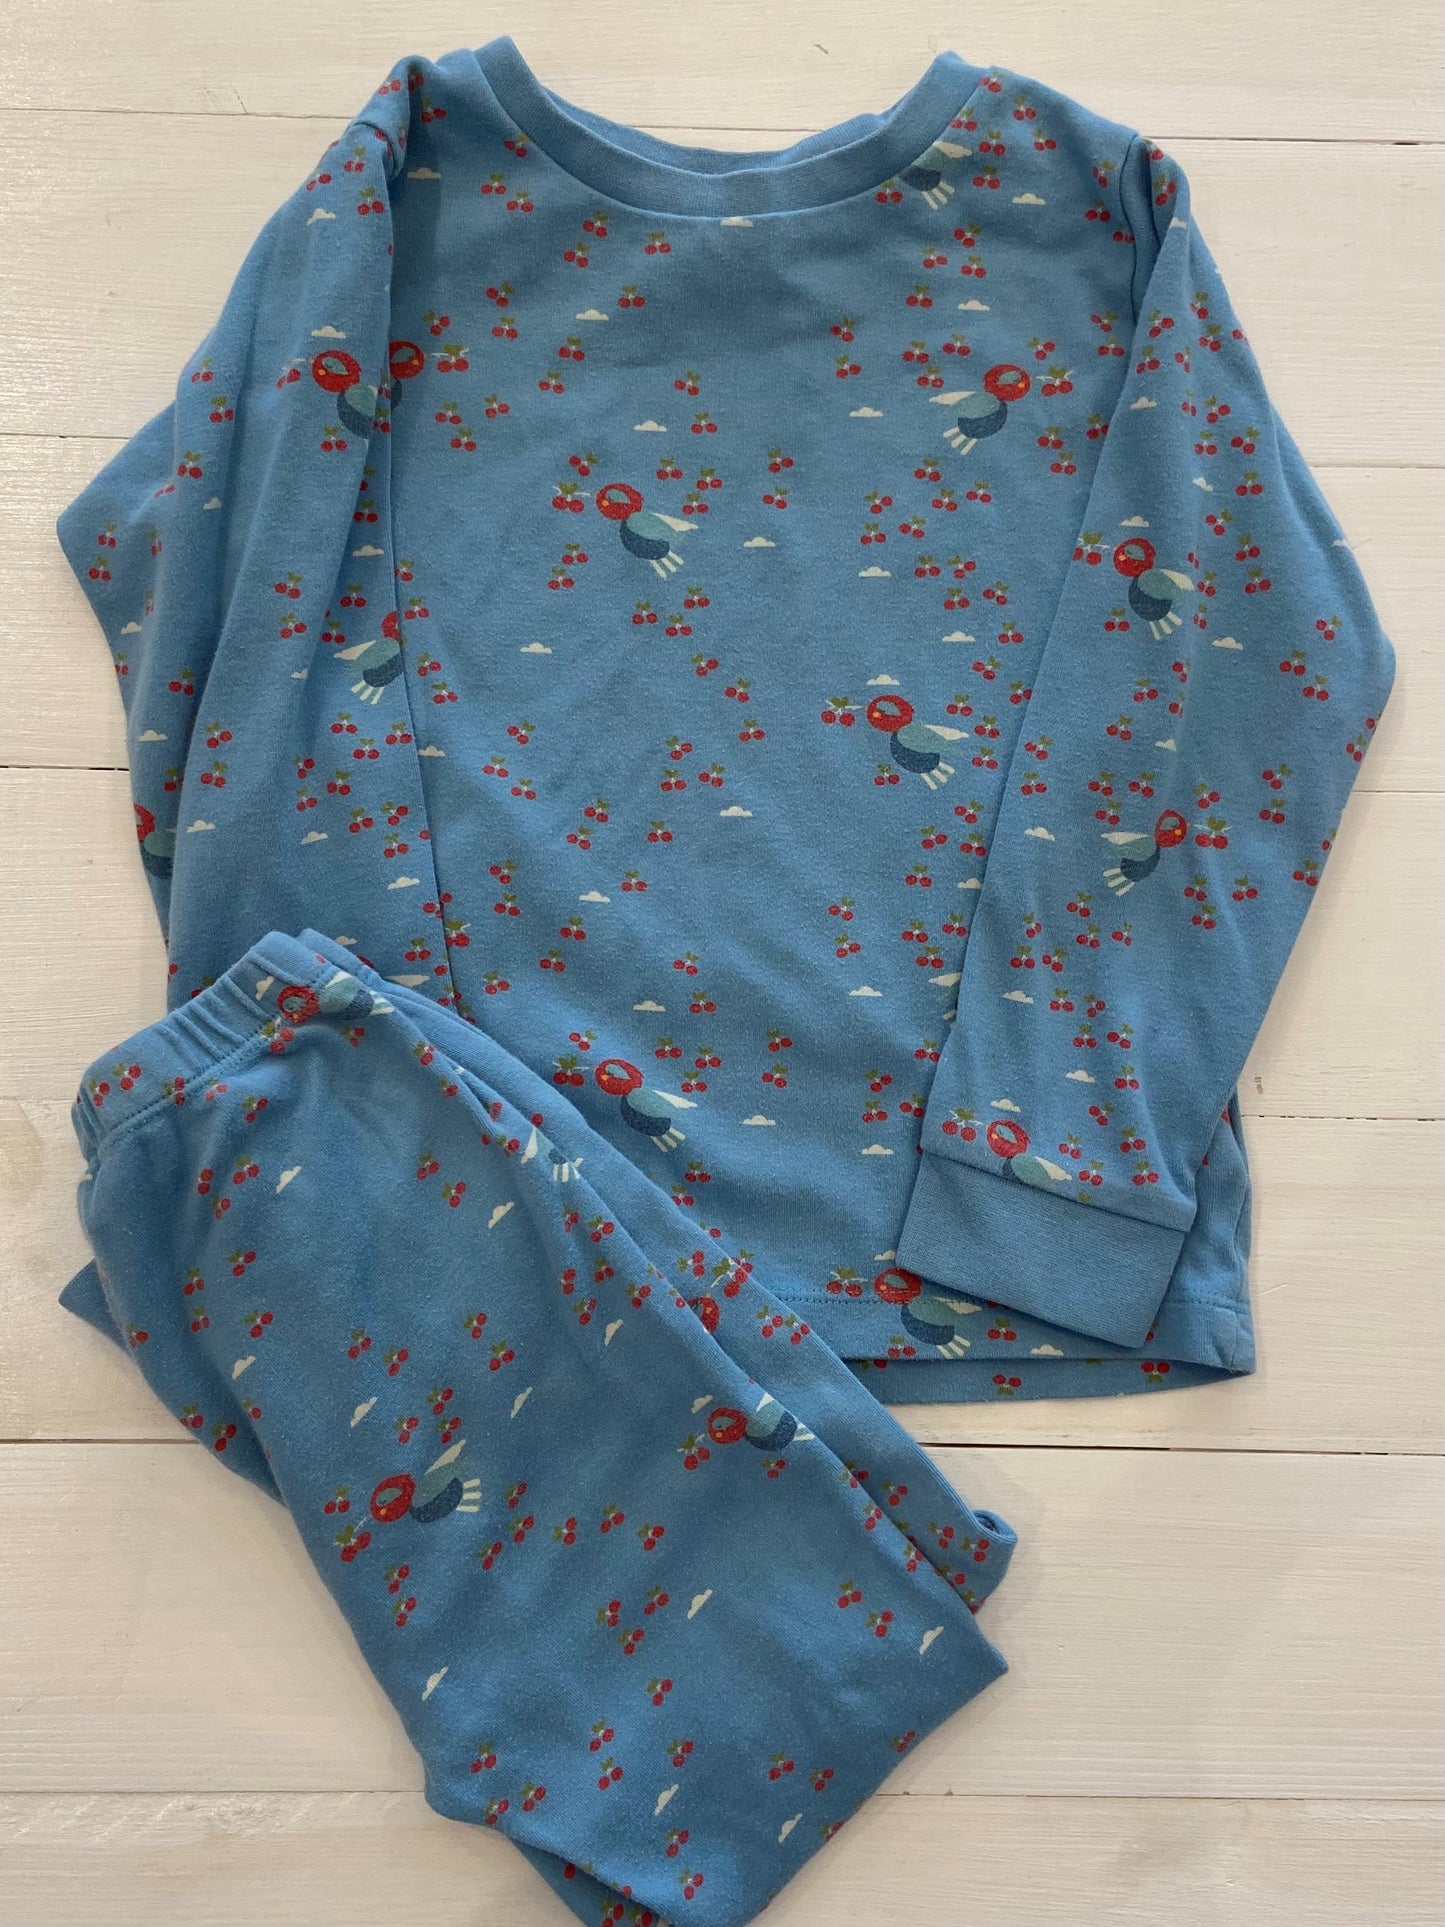 Pre-loved Cherry Blossom PJs by Little Green Radicals